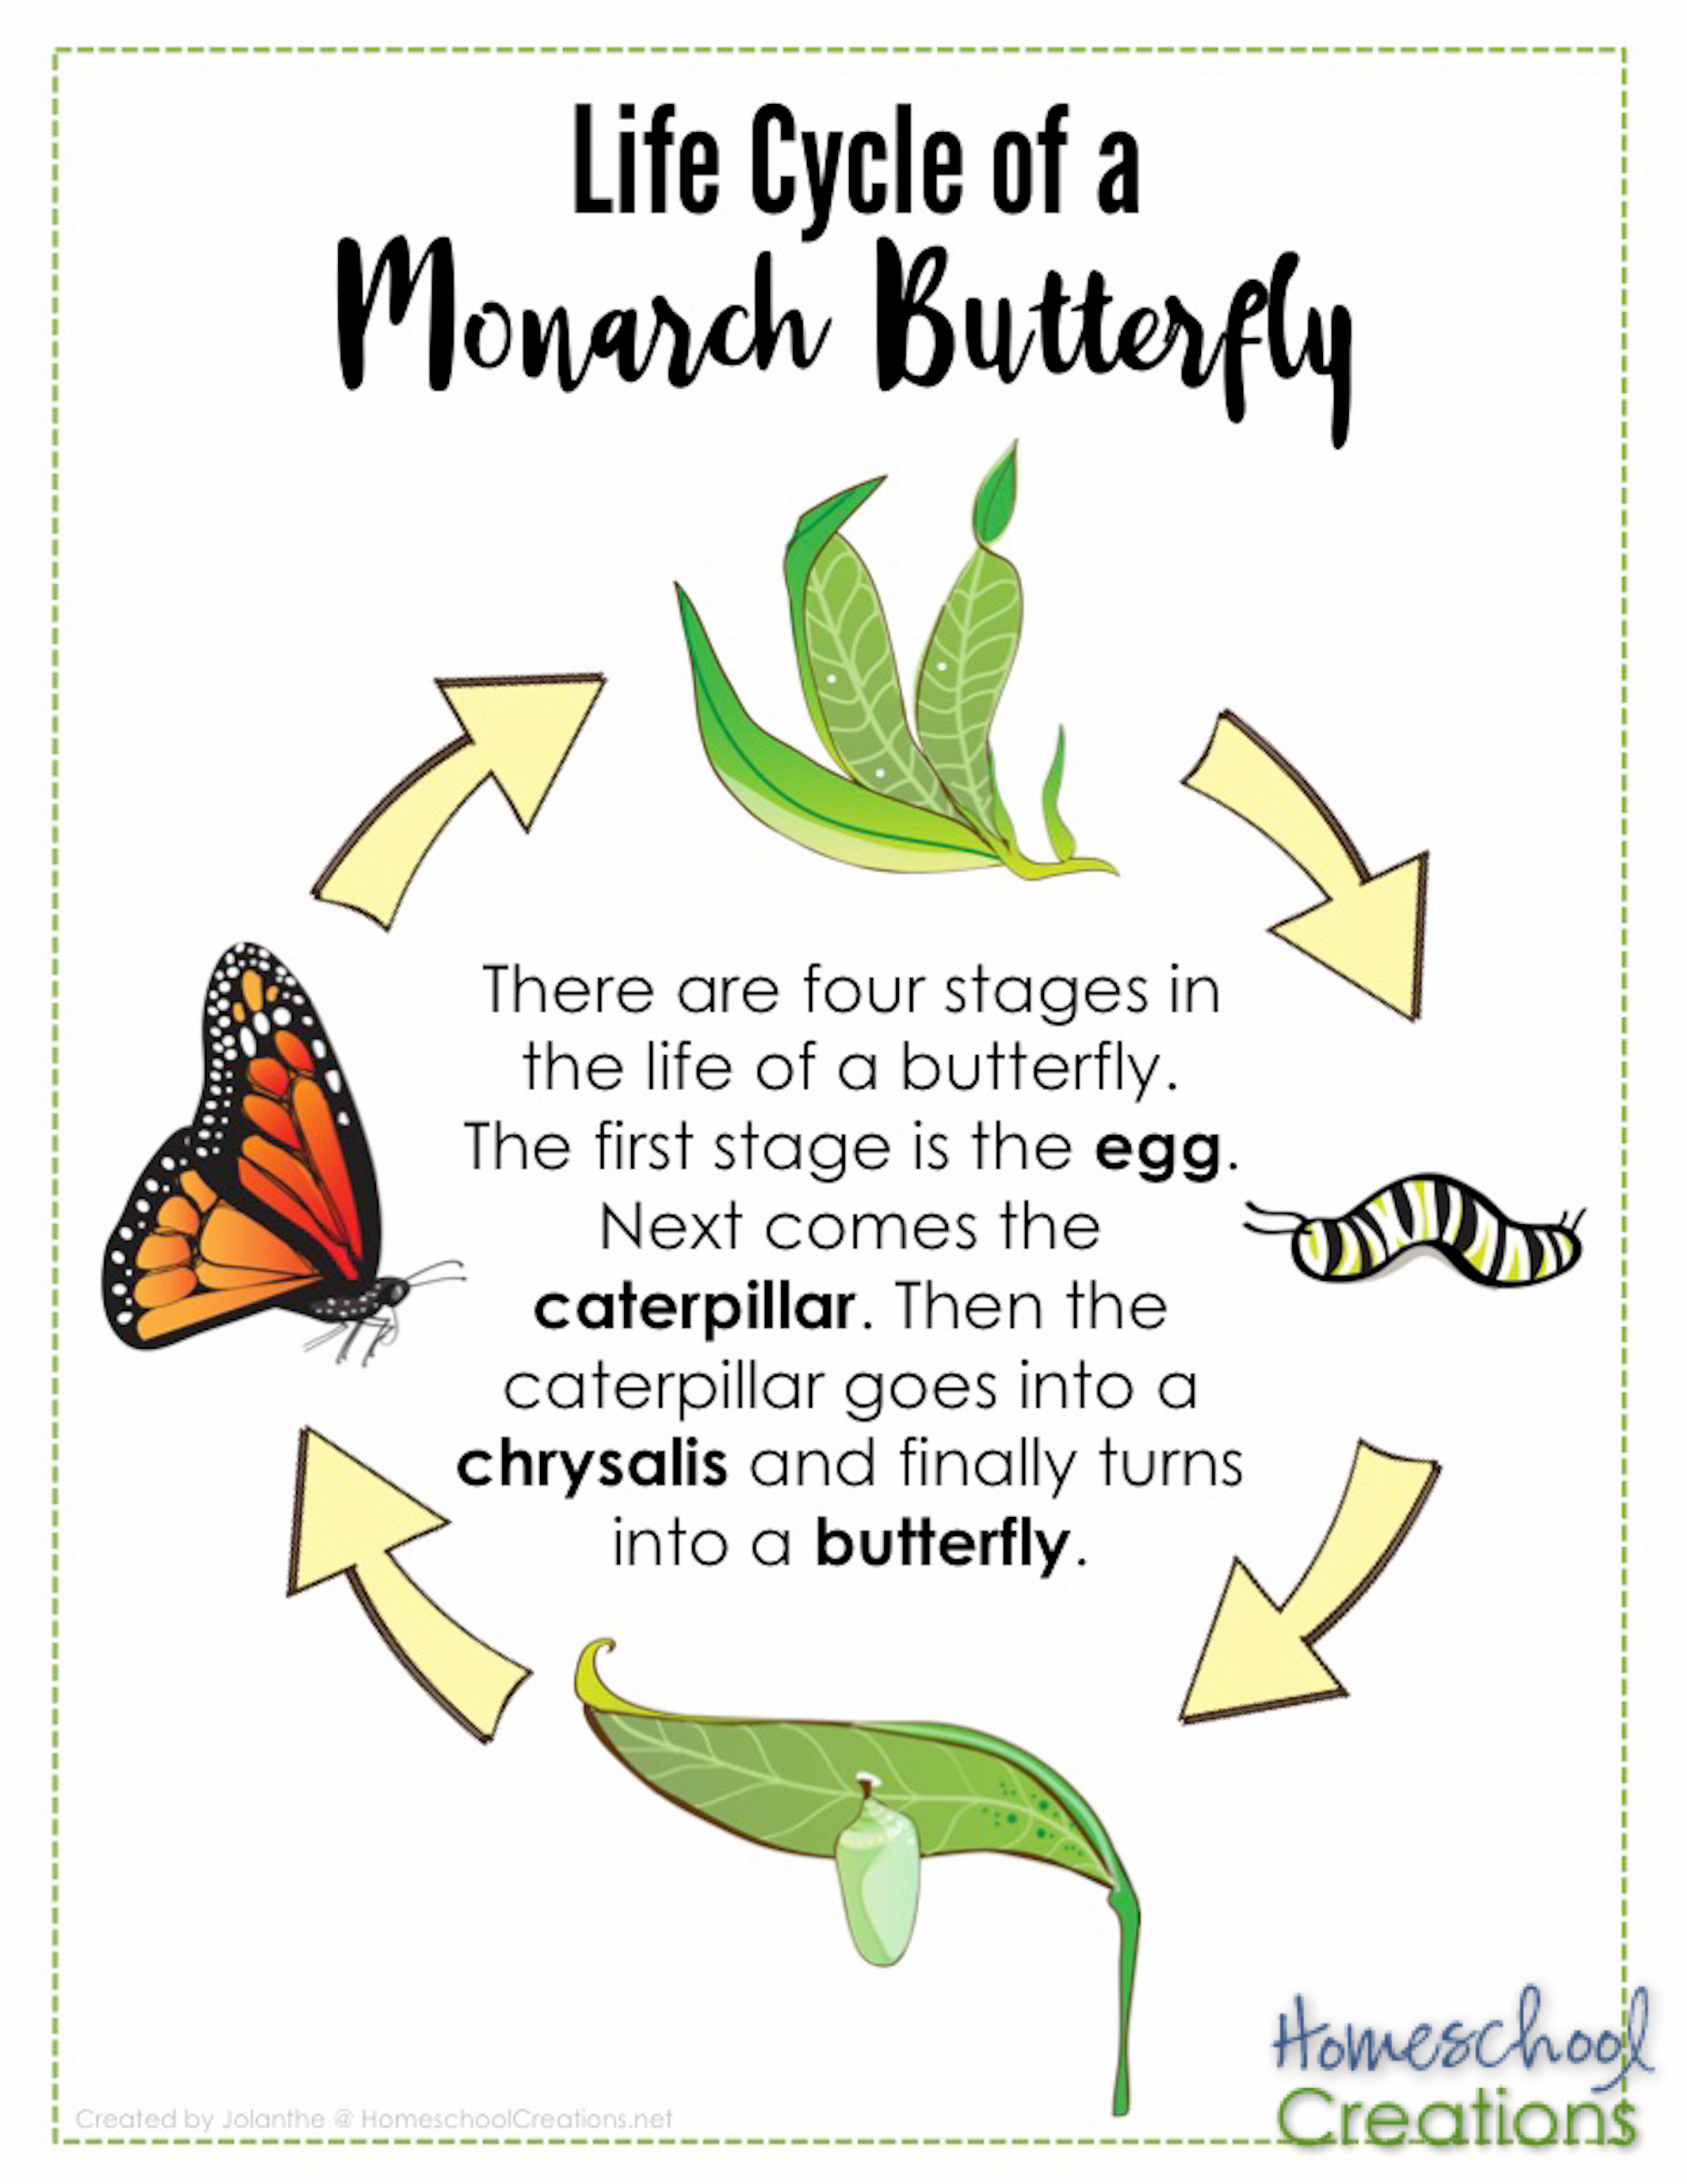 life-cycle-of-monarch-butterfly-poster-homeschoolcreations